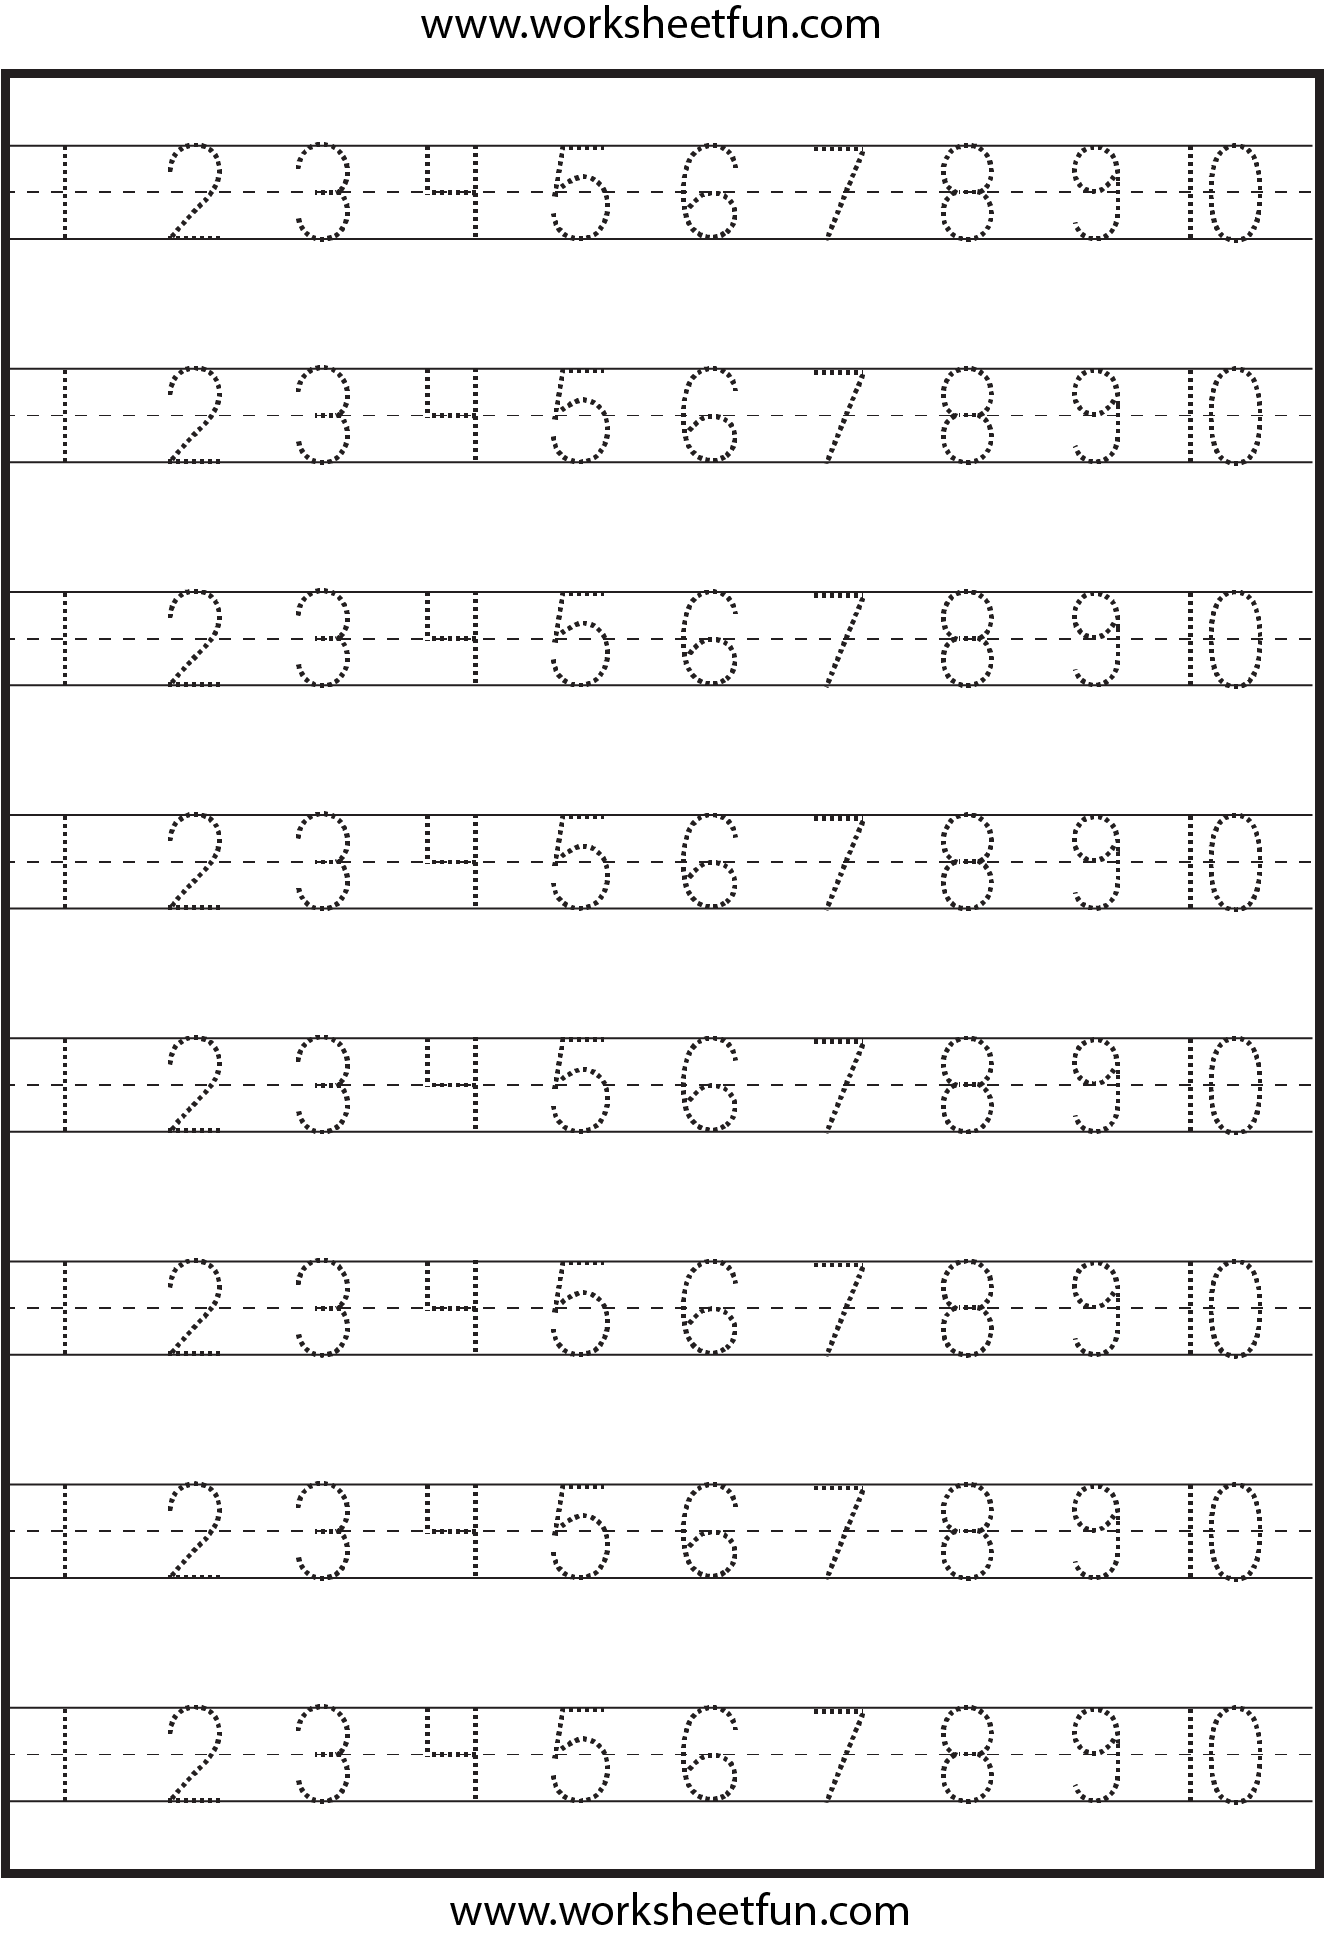 free-printable-number-1-10-worksheets-printable-form-templates-and-letter